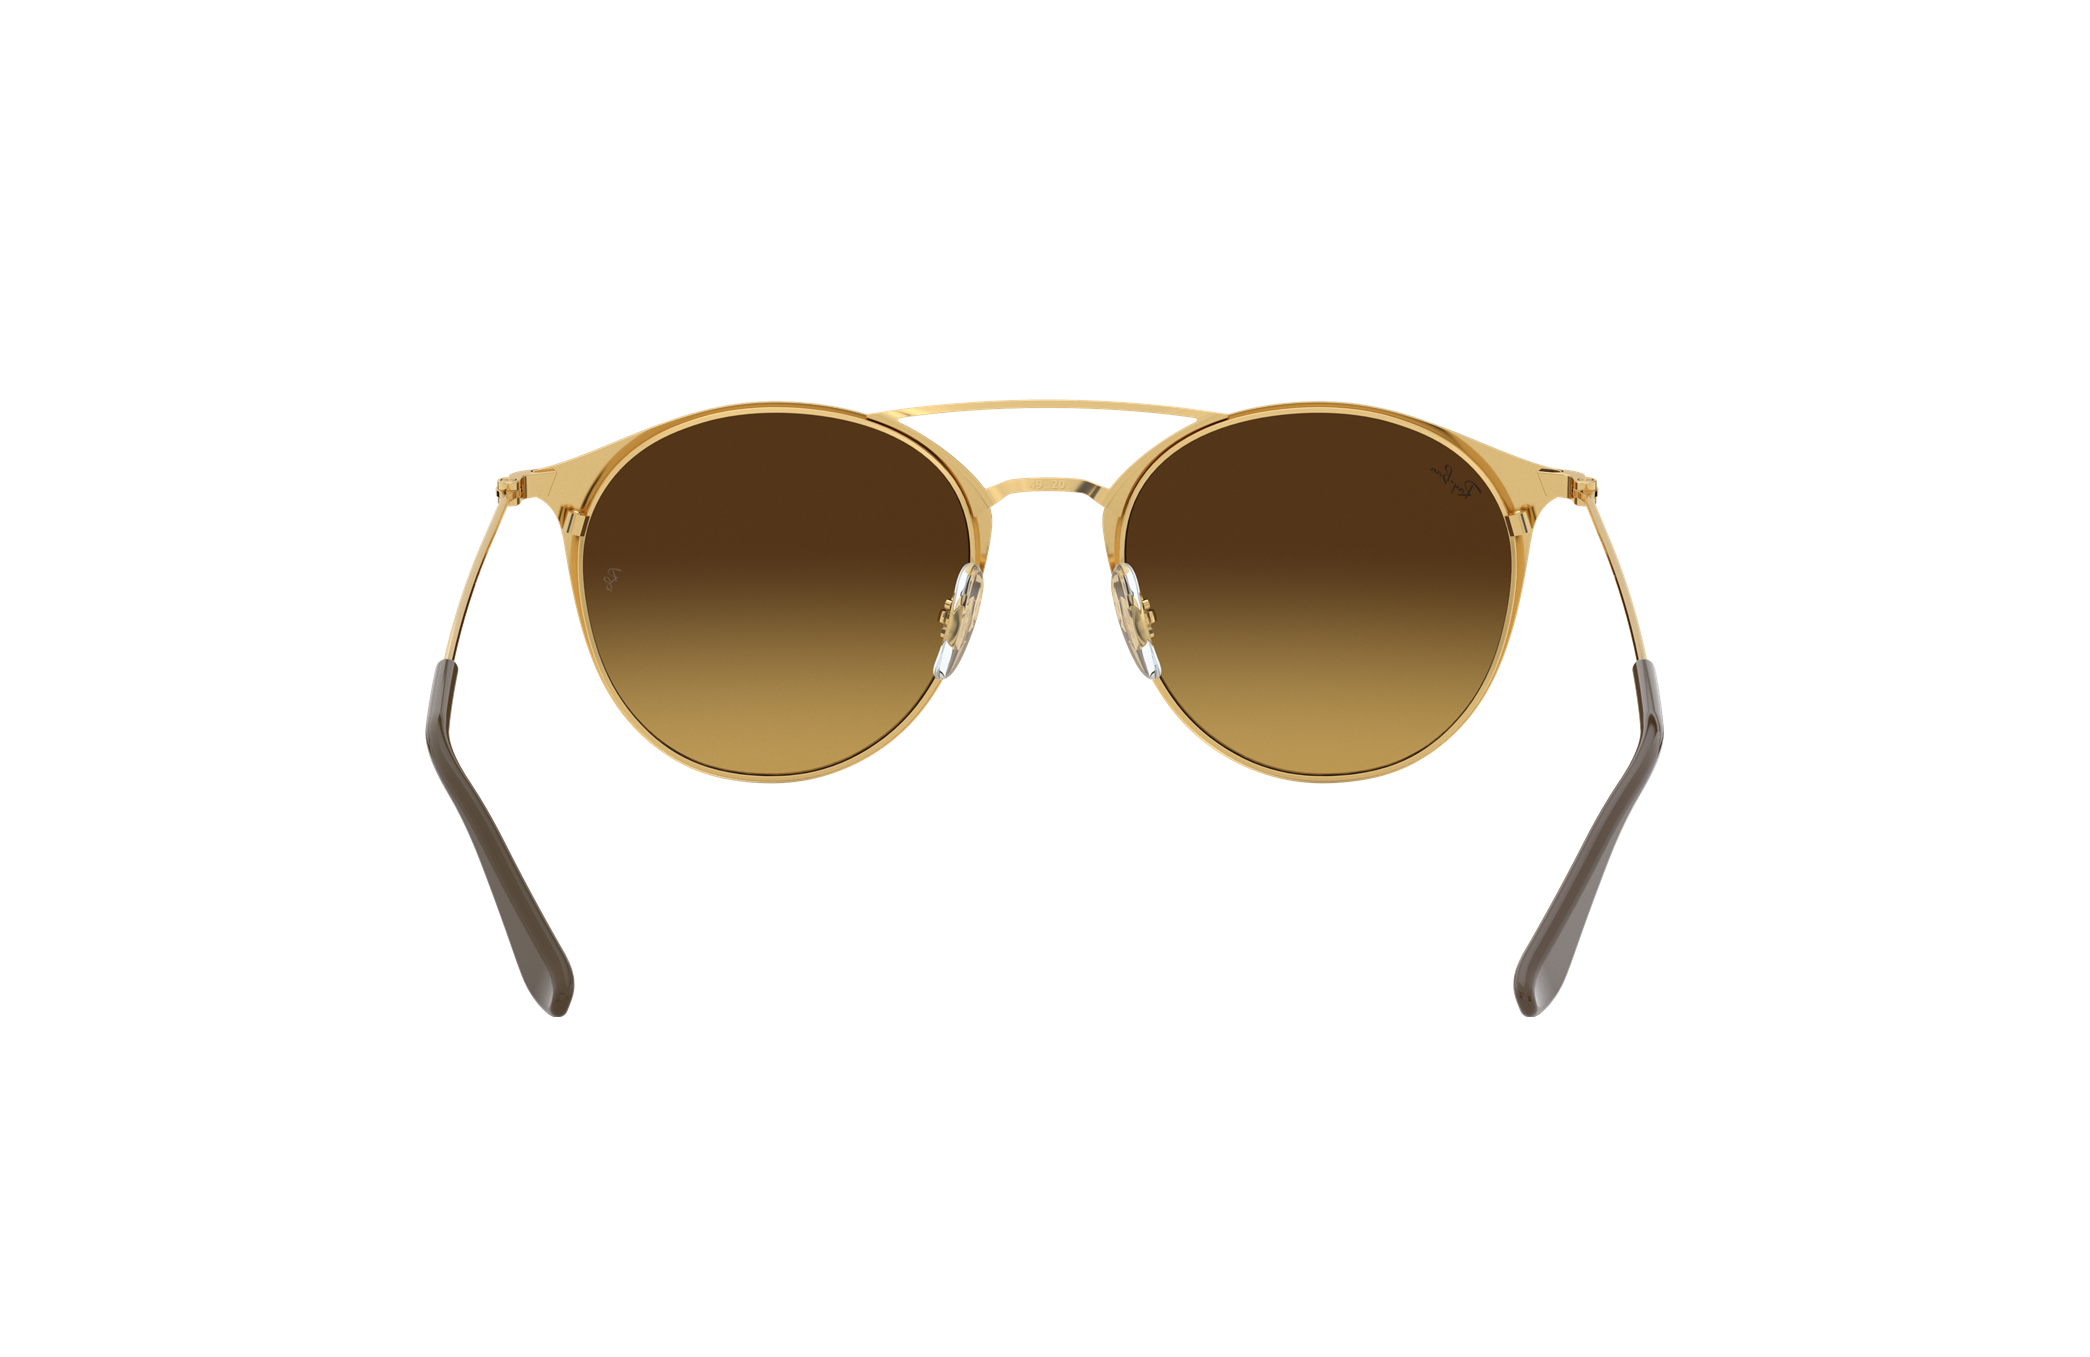 Rb3546 Sunglasses in Brown and Brown Gradient - RB3546 | Ray-Ban® EU